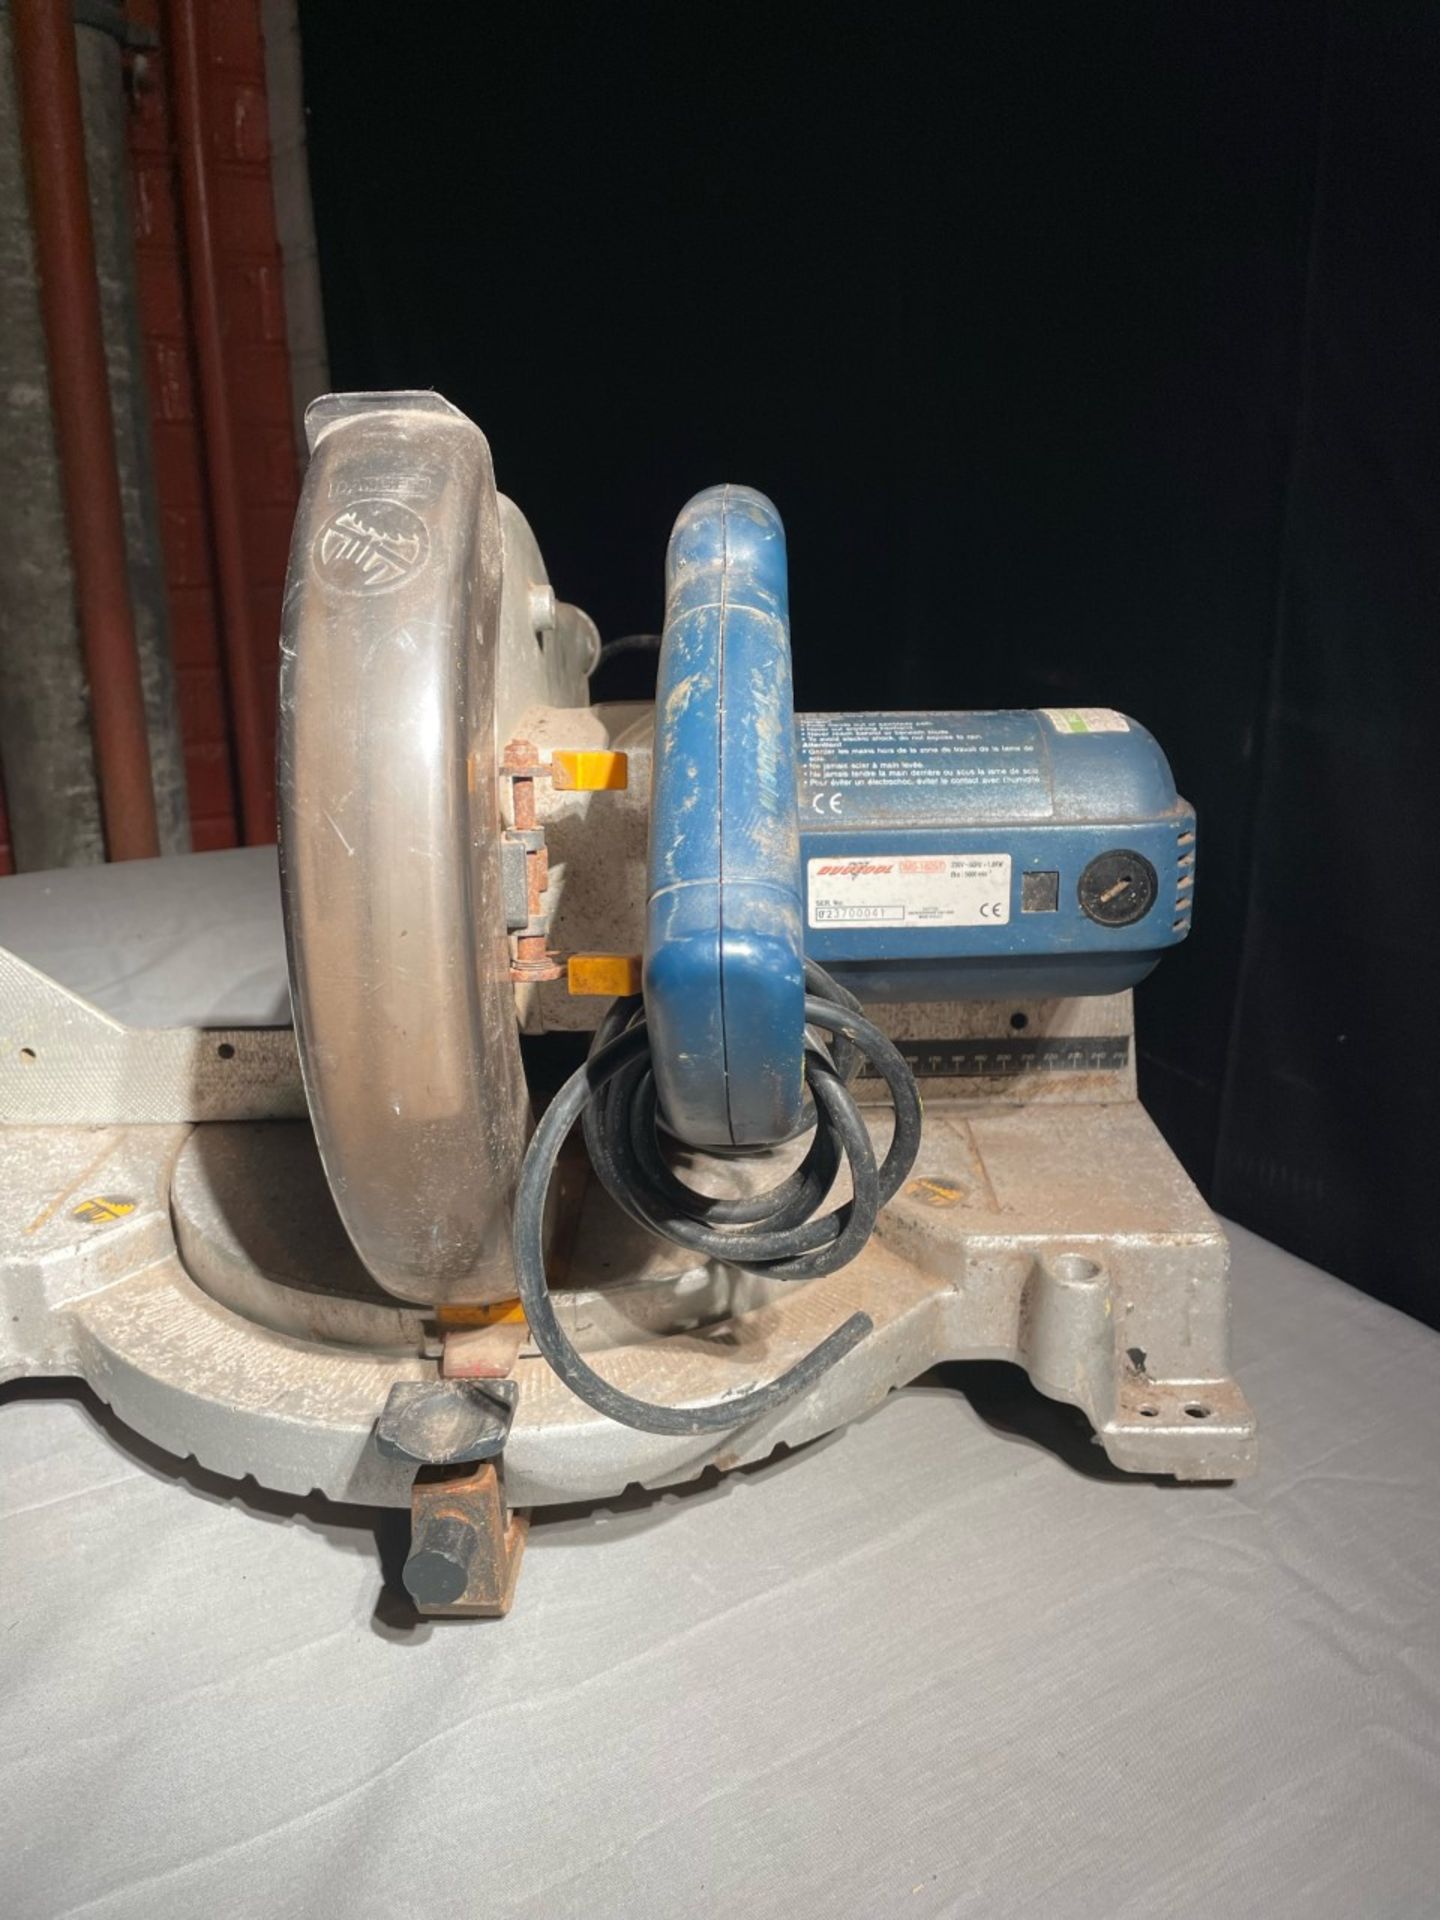 Duotool DMS 1825/D 230v mitresaw. Works but has no blade or plug attached - Bild 2 aus 2